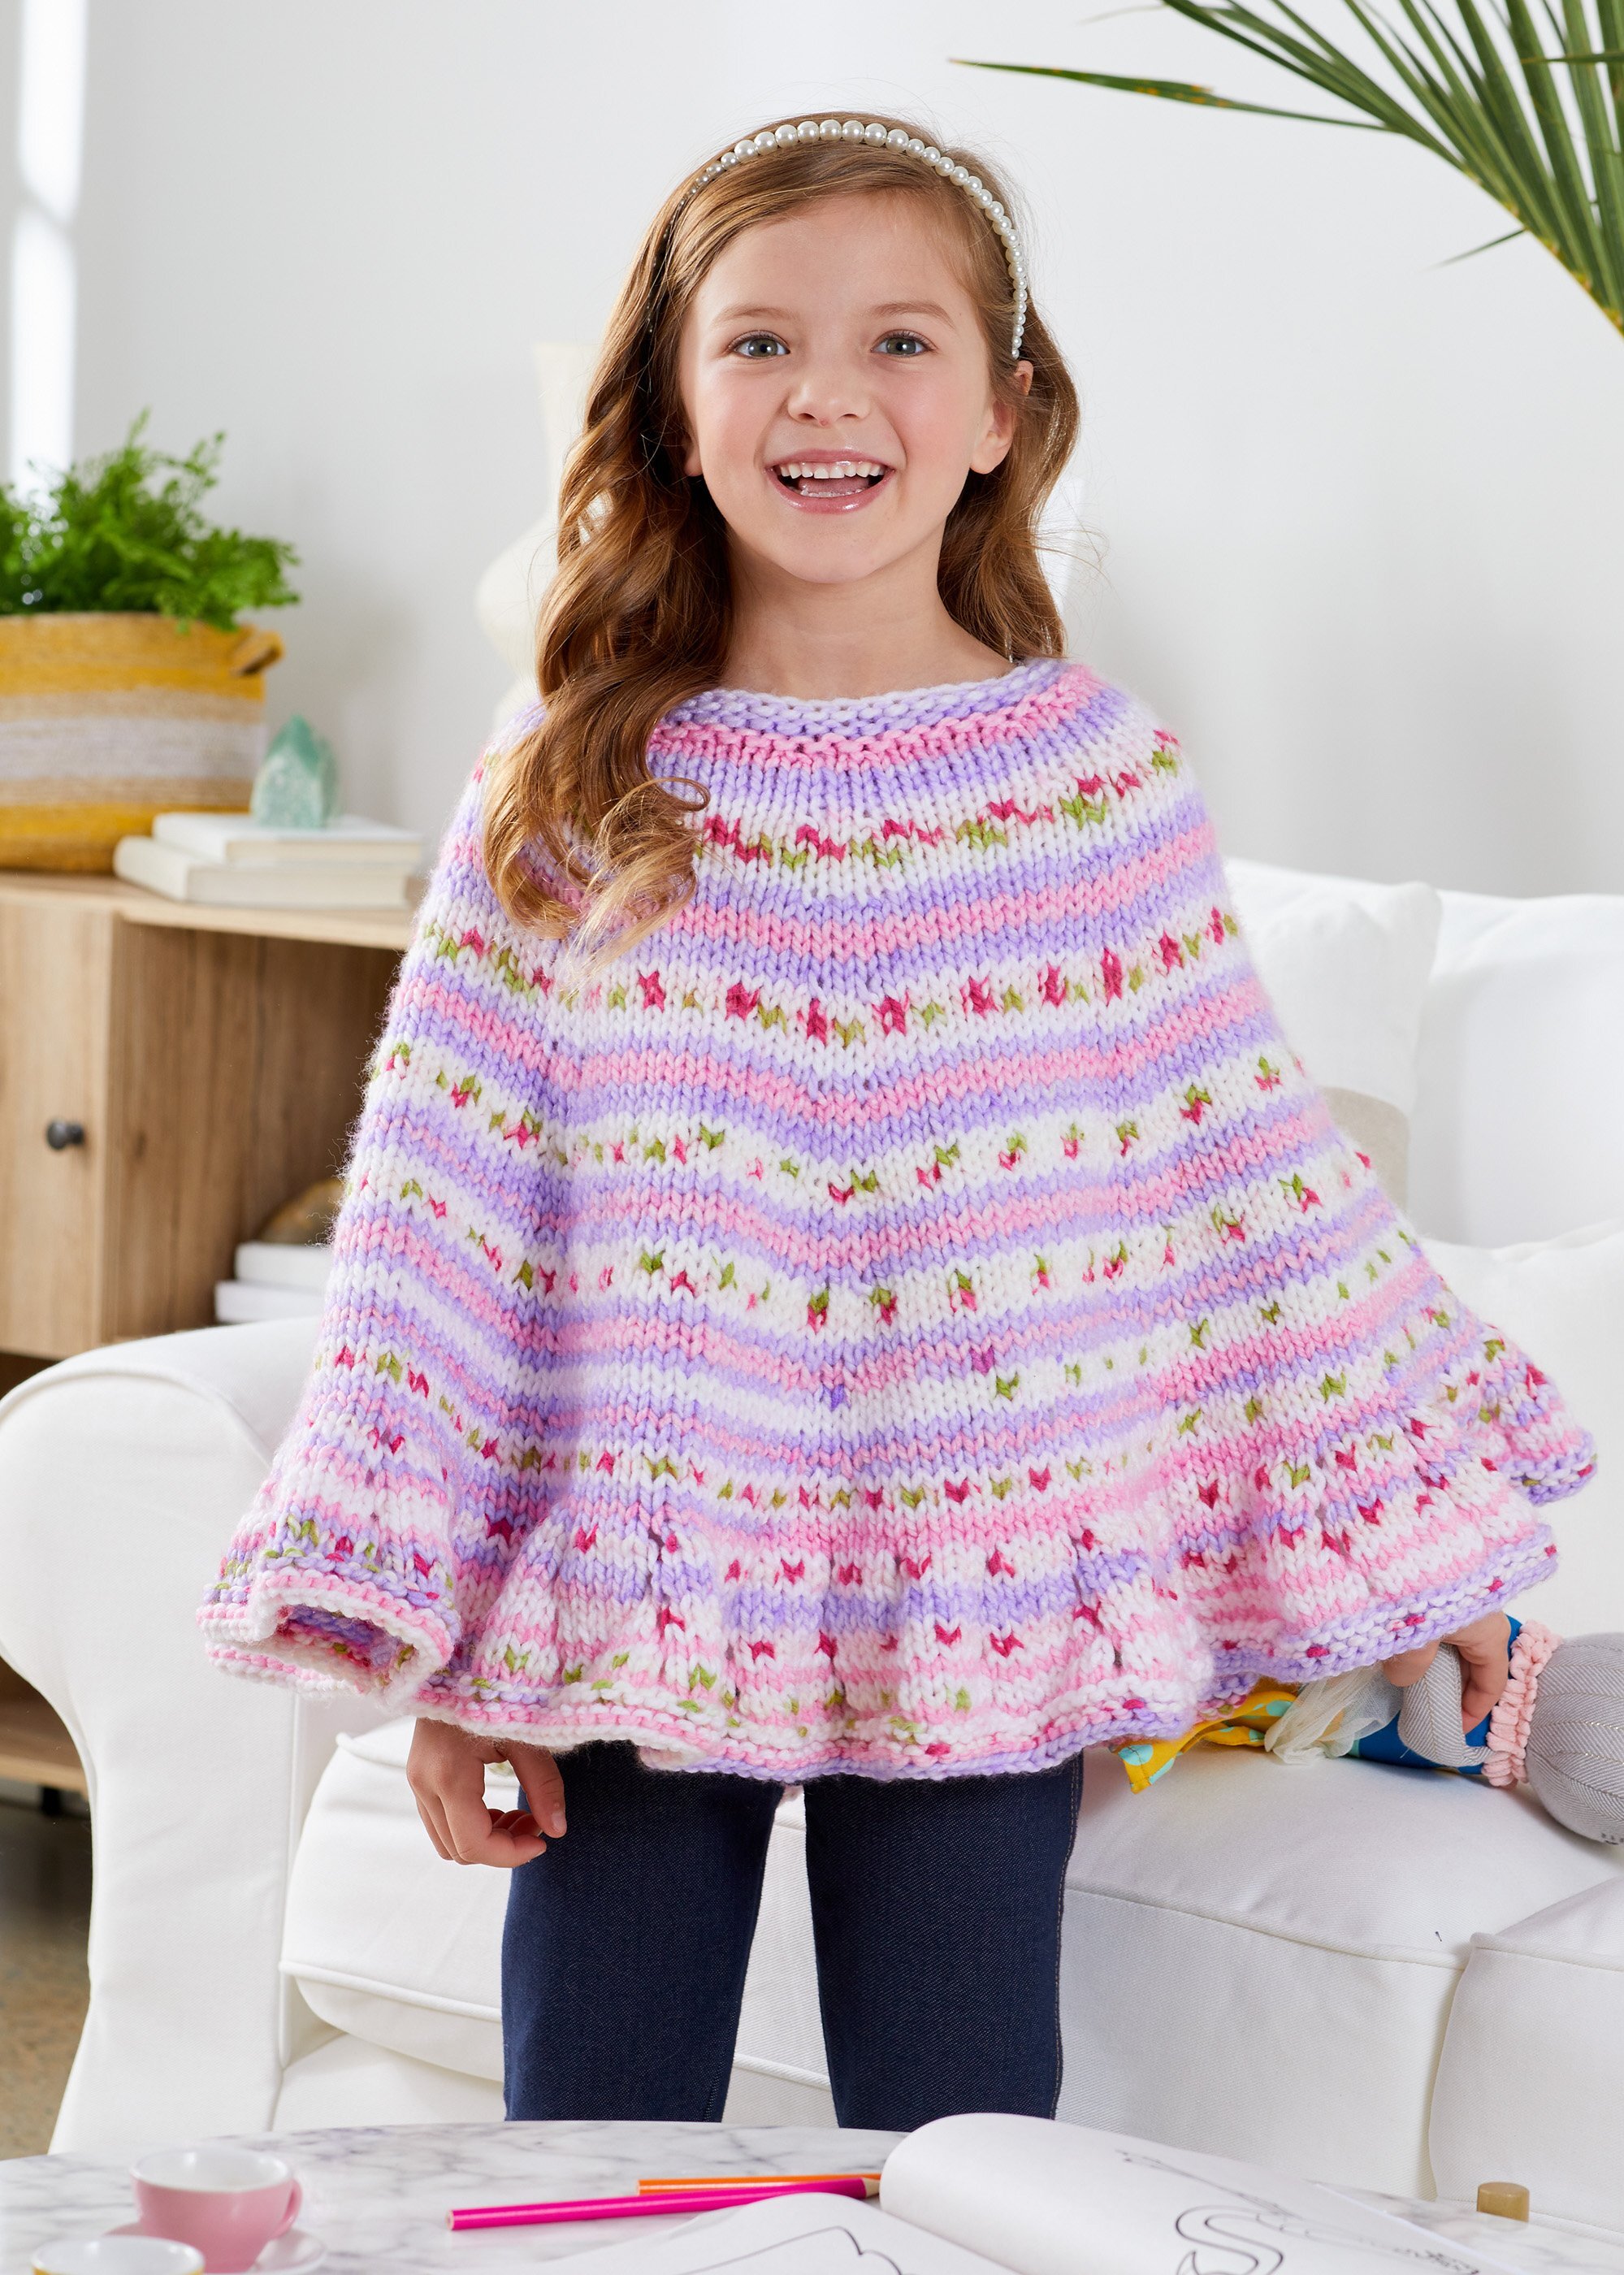 PDF KNITTING PATTERN for girls worsted weight poncho